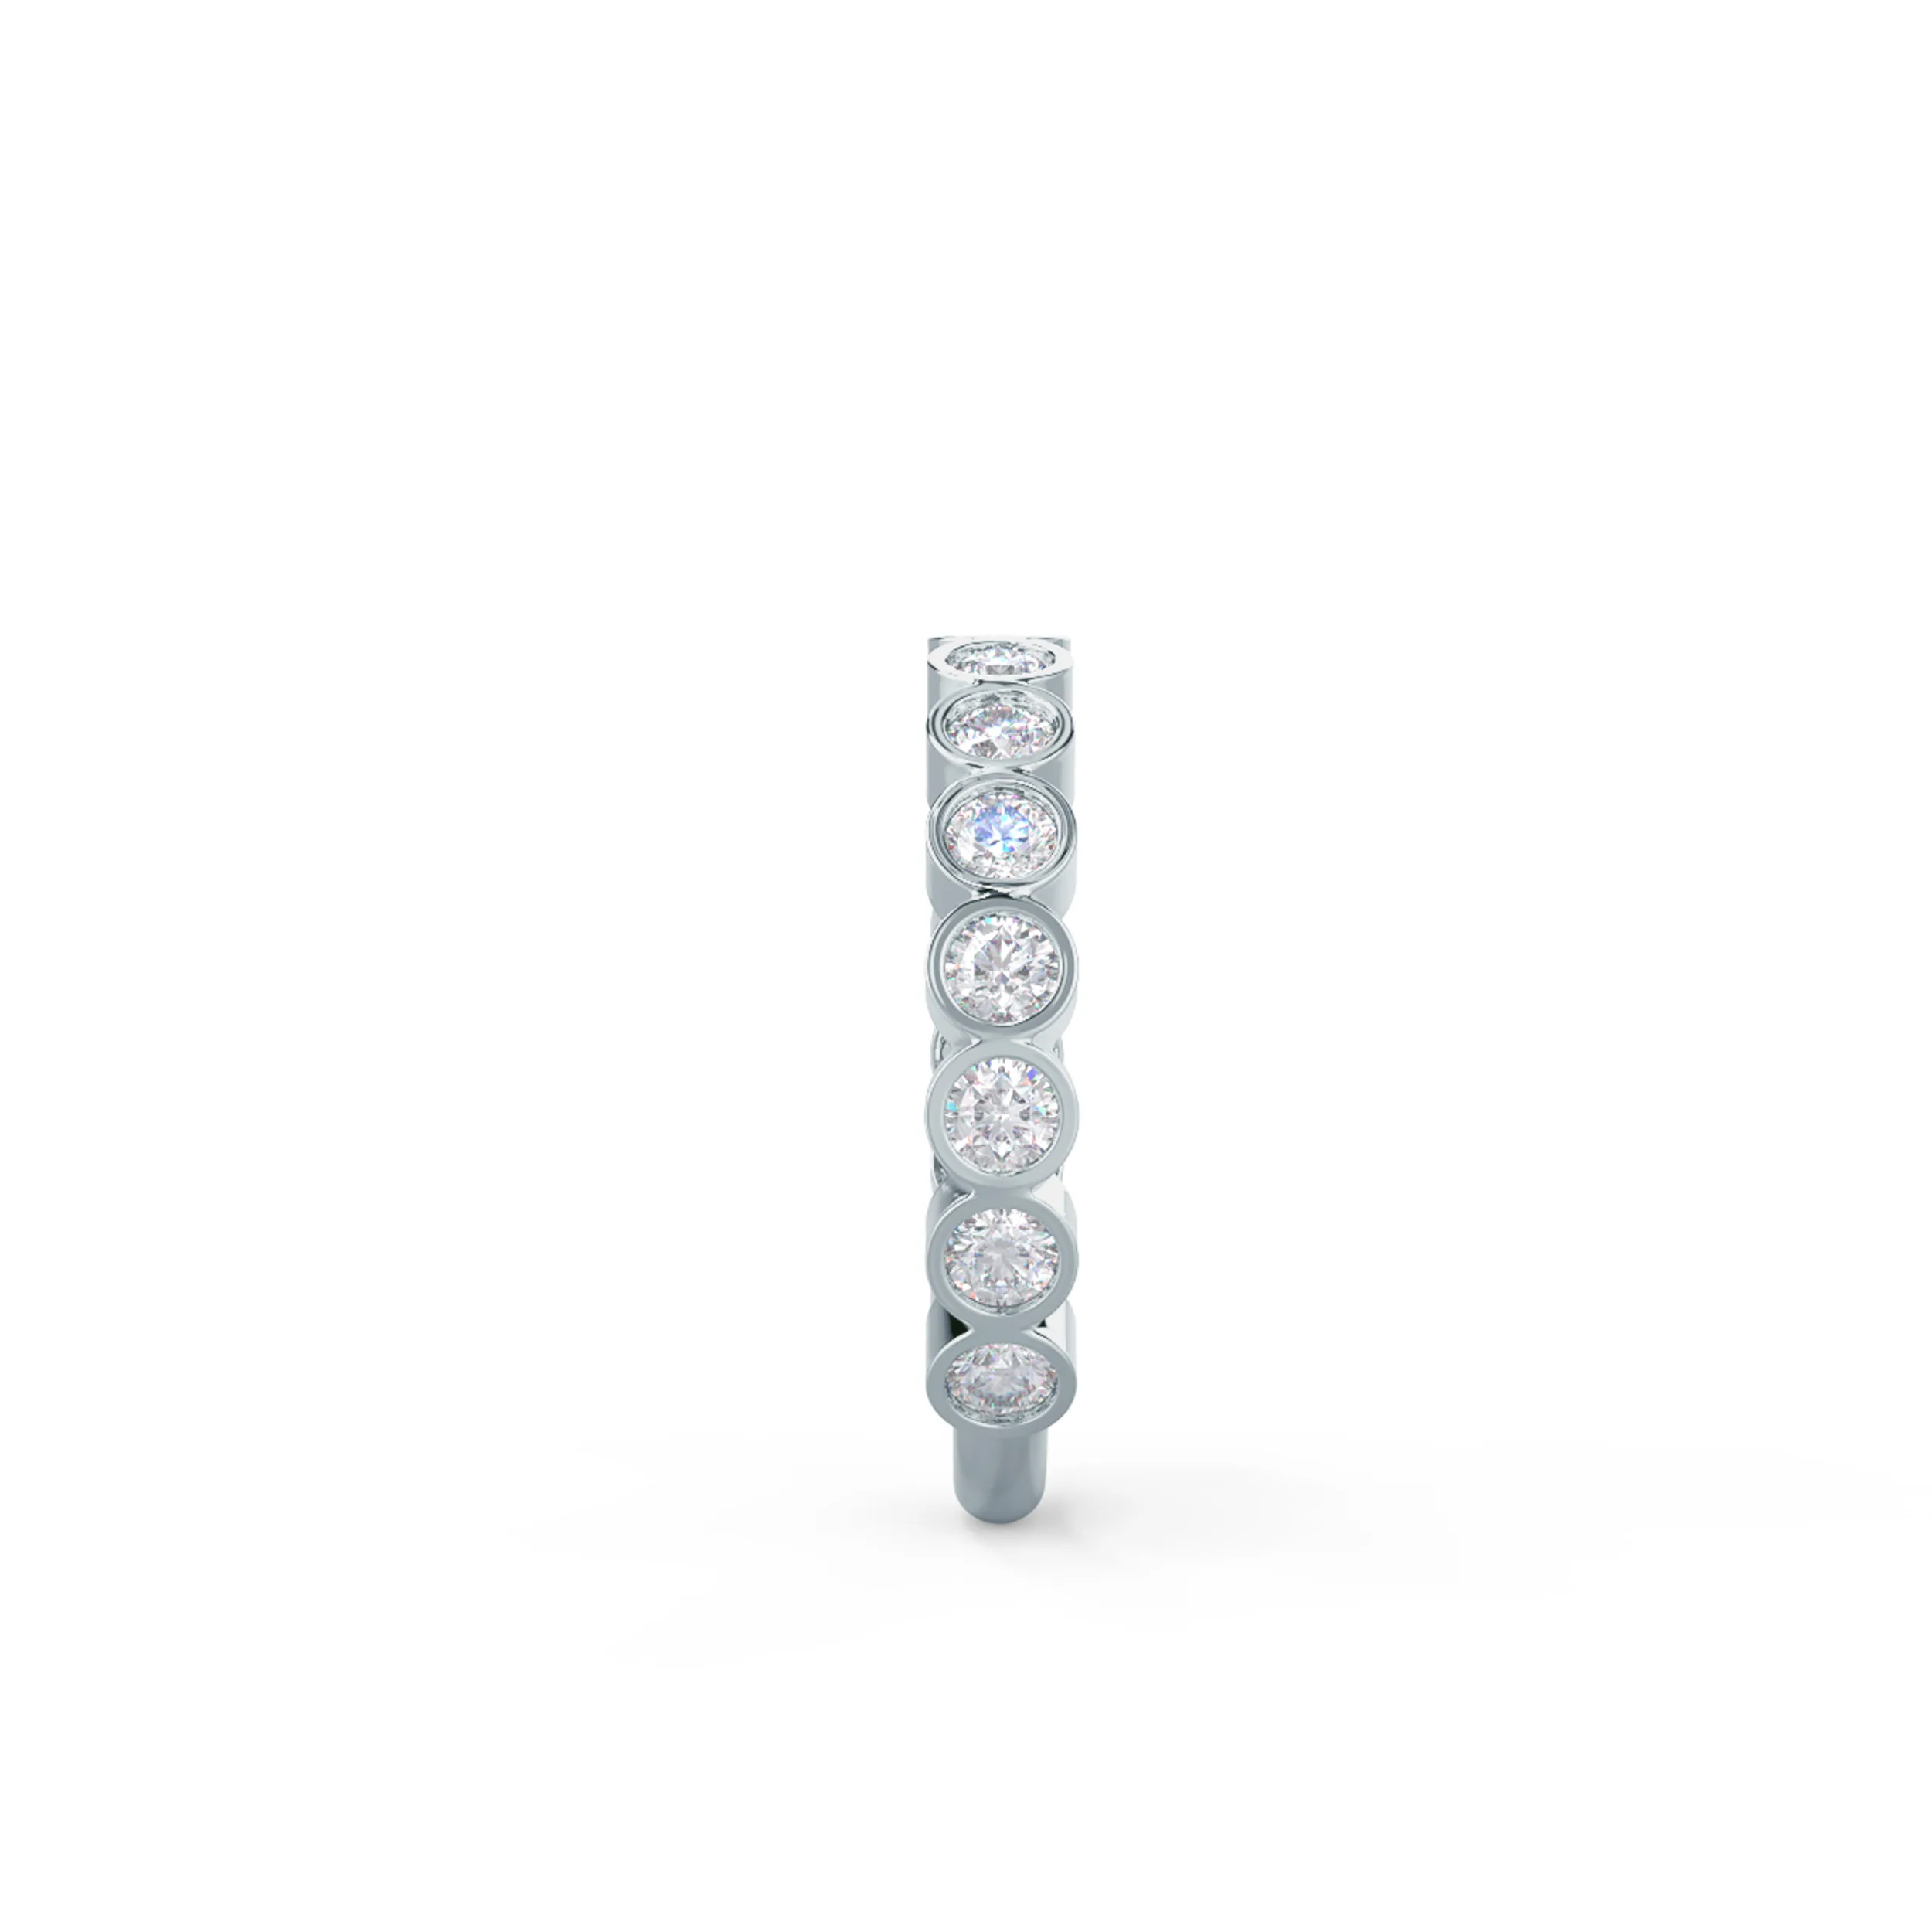 0.75 Carat Round Synthetic Diamonds set in 18k White Gold Bezel Three Quarter Band (Side View)